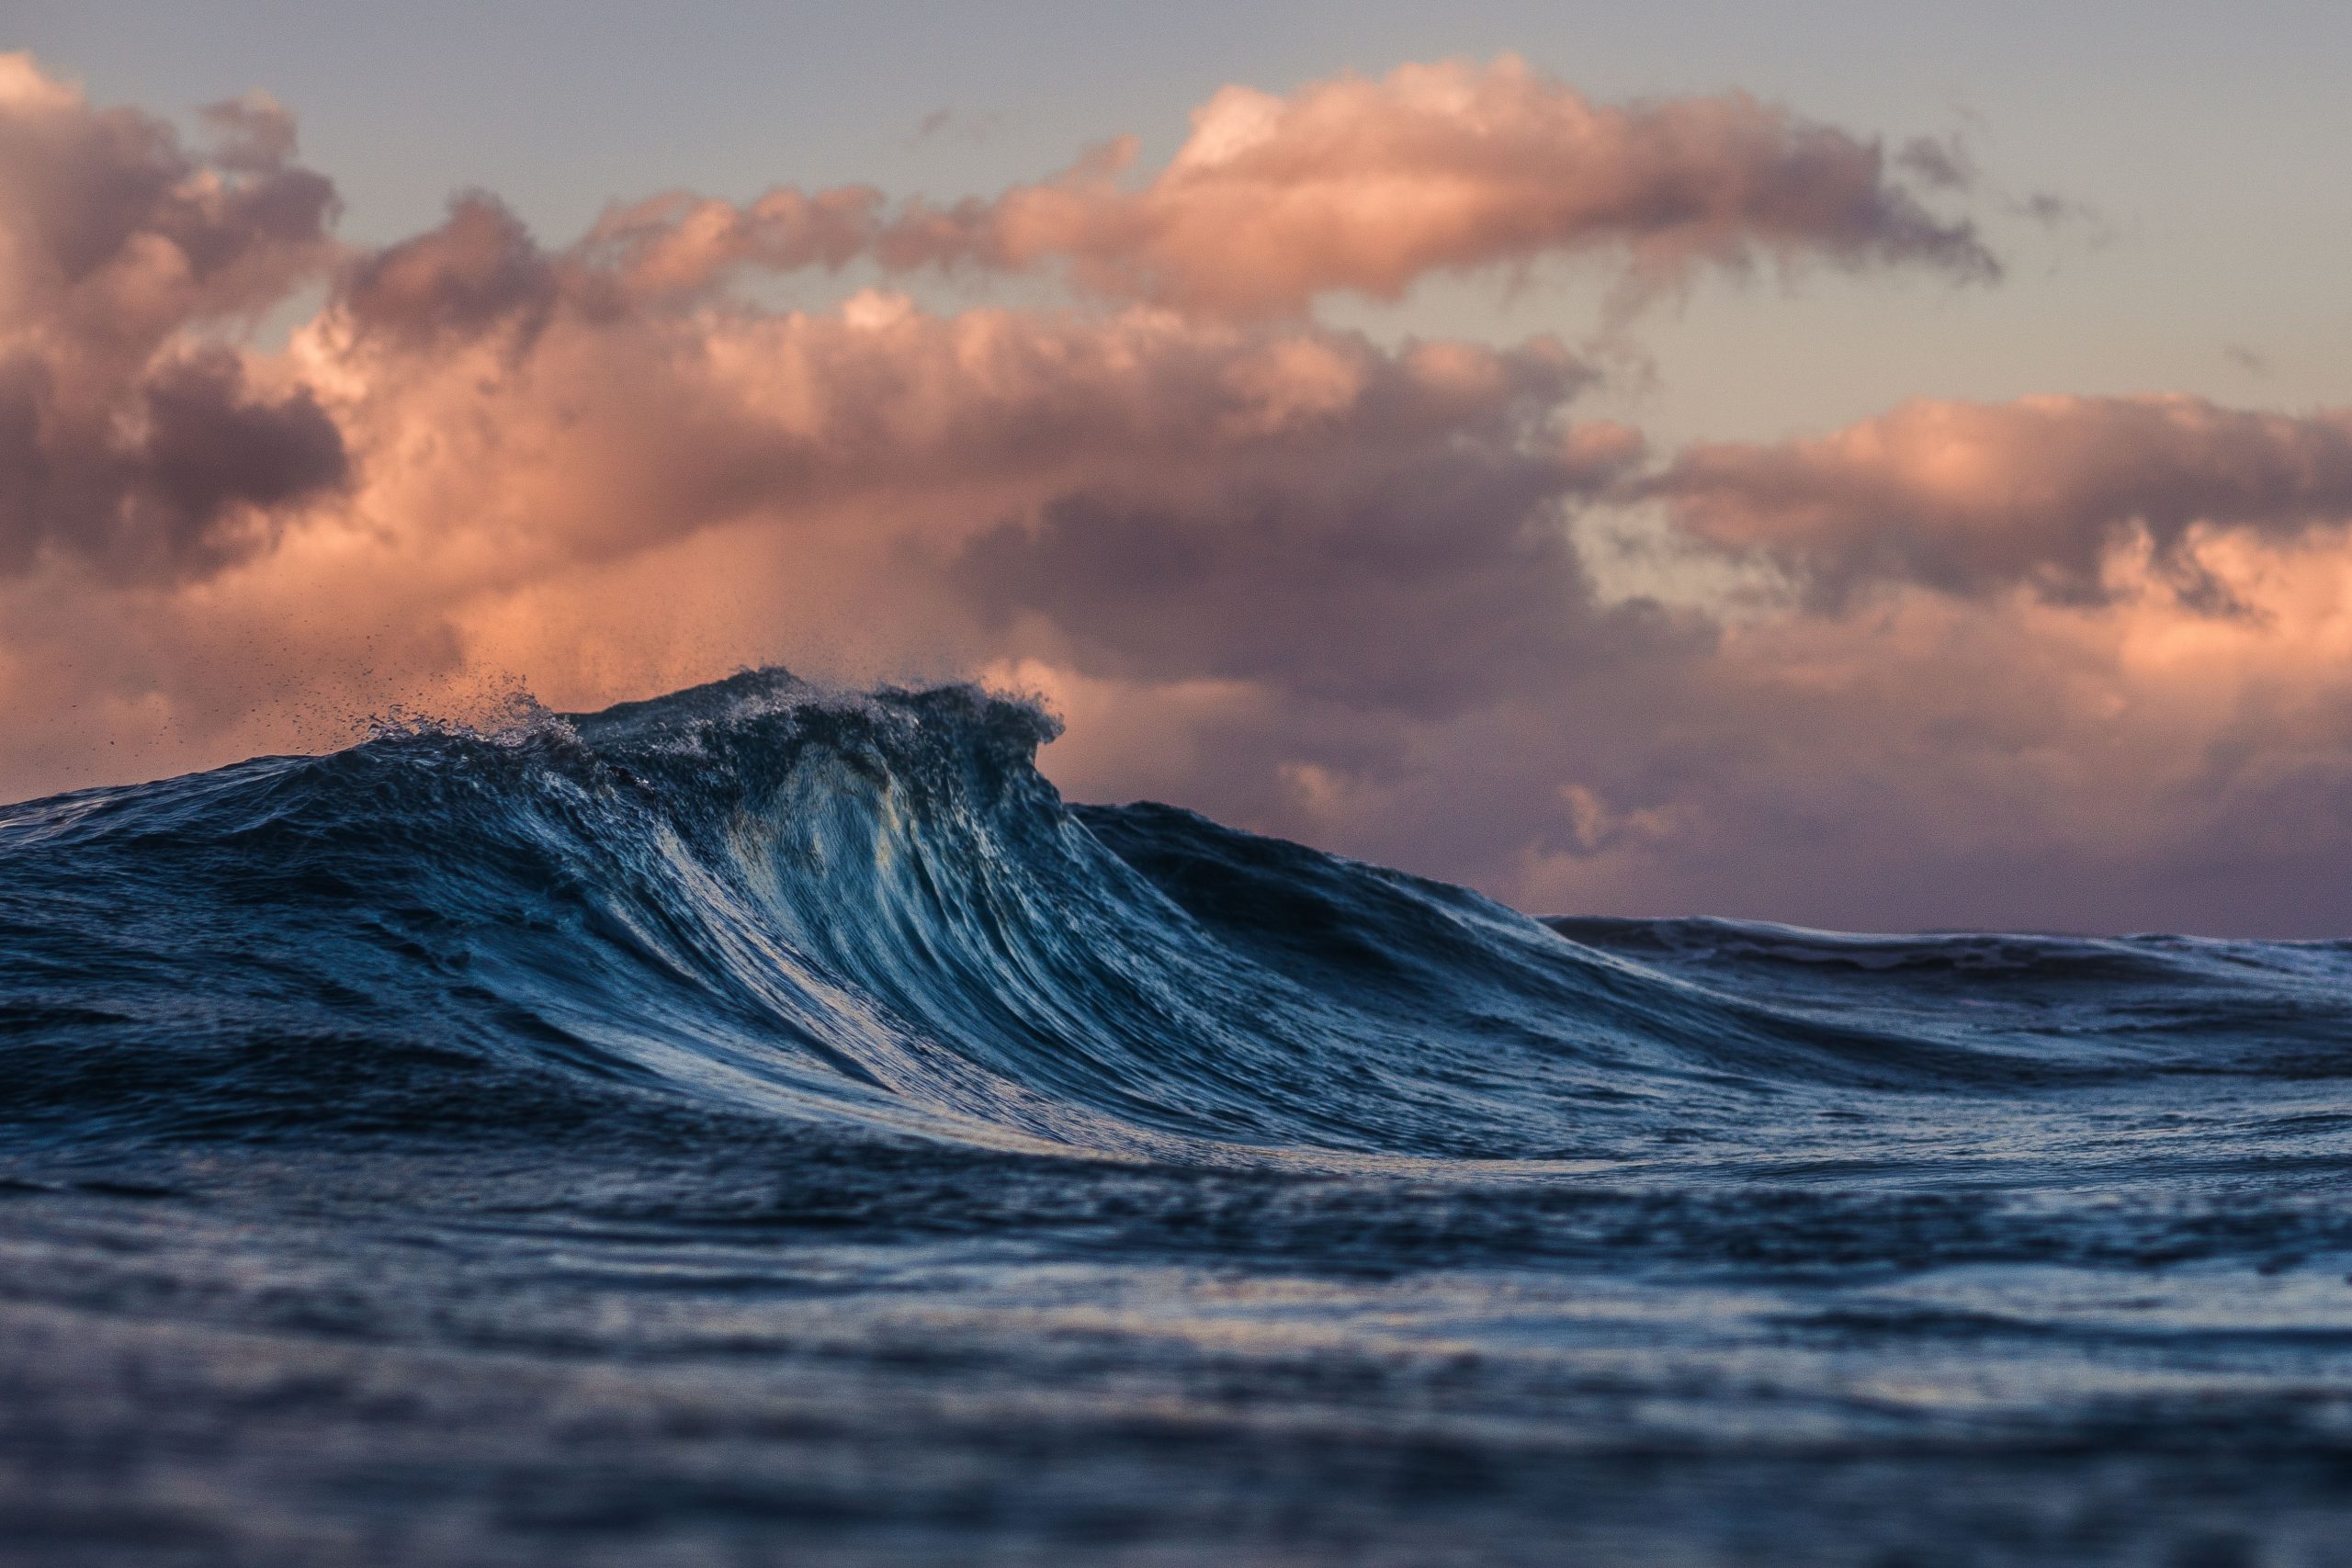 Harnessing the energy of waves is approaching affordability. (Image: Unsplash)